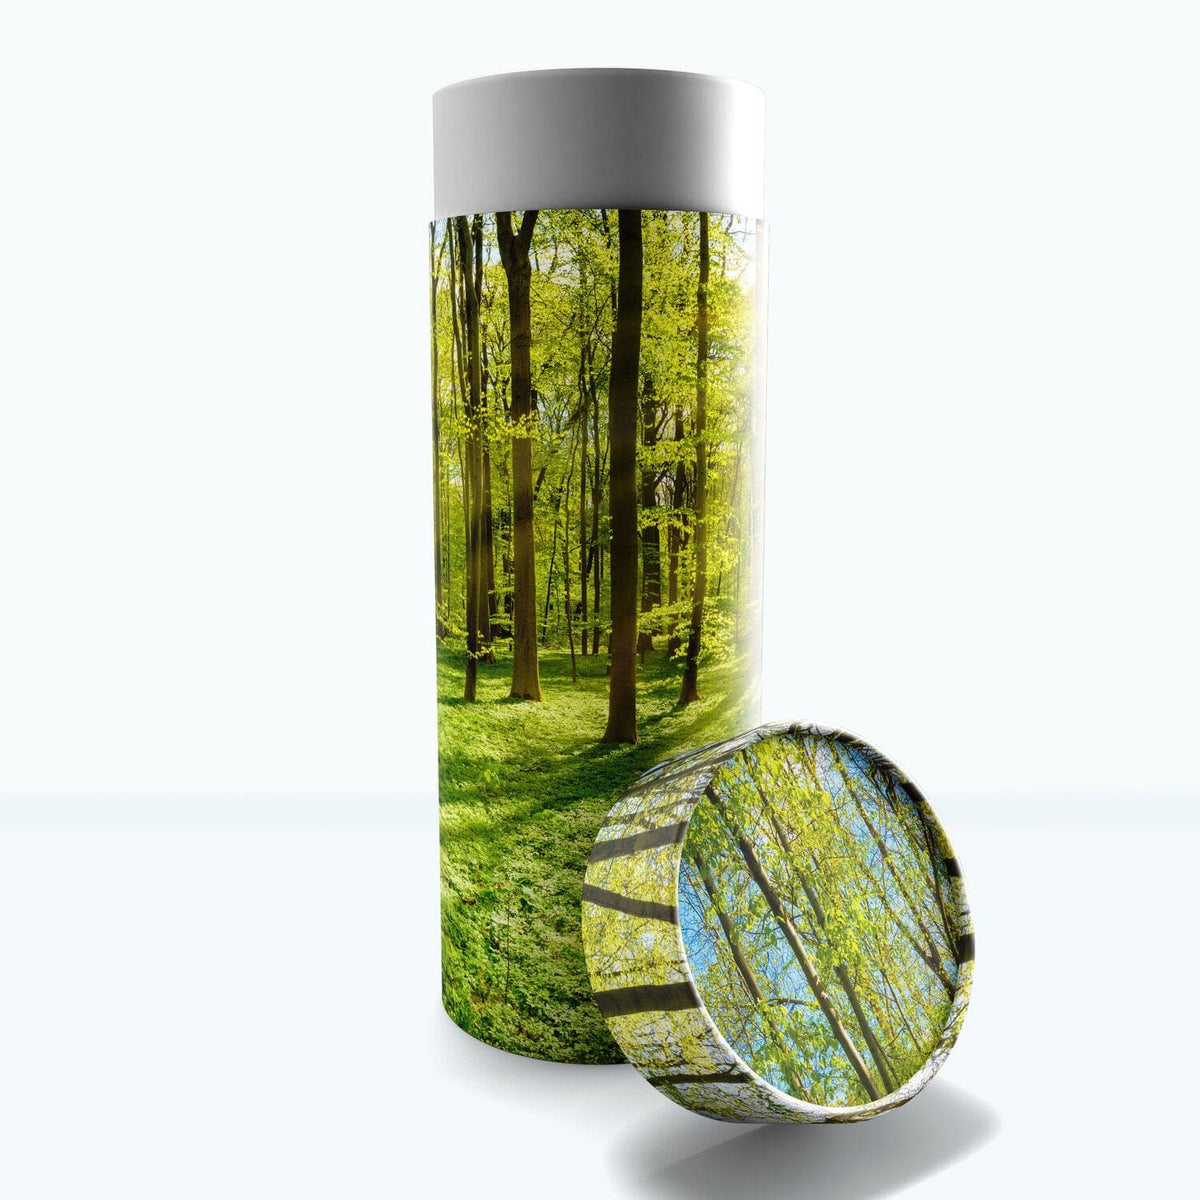 Commemorative Cremation Urns Medium Emerald Forest Biodegradable &amp; Eco Friendly Burial or Scattering Urn / Tube